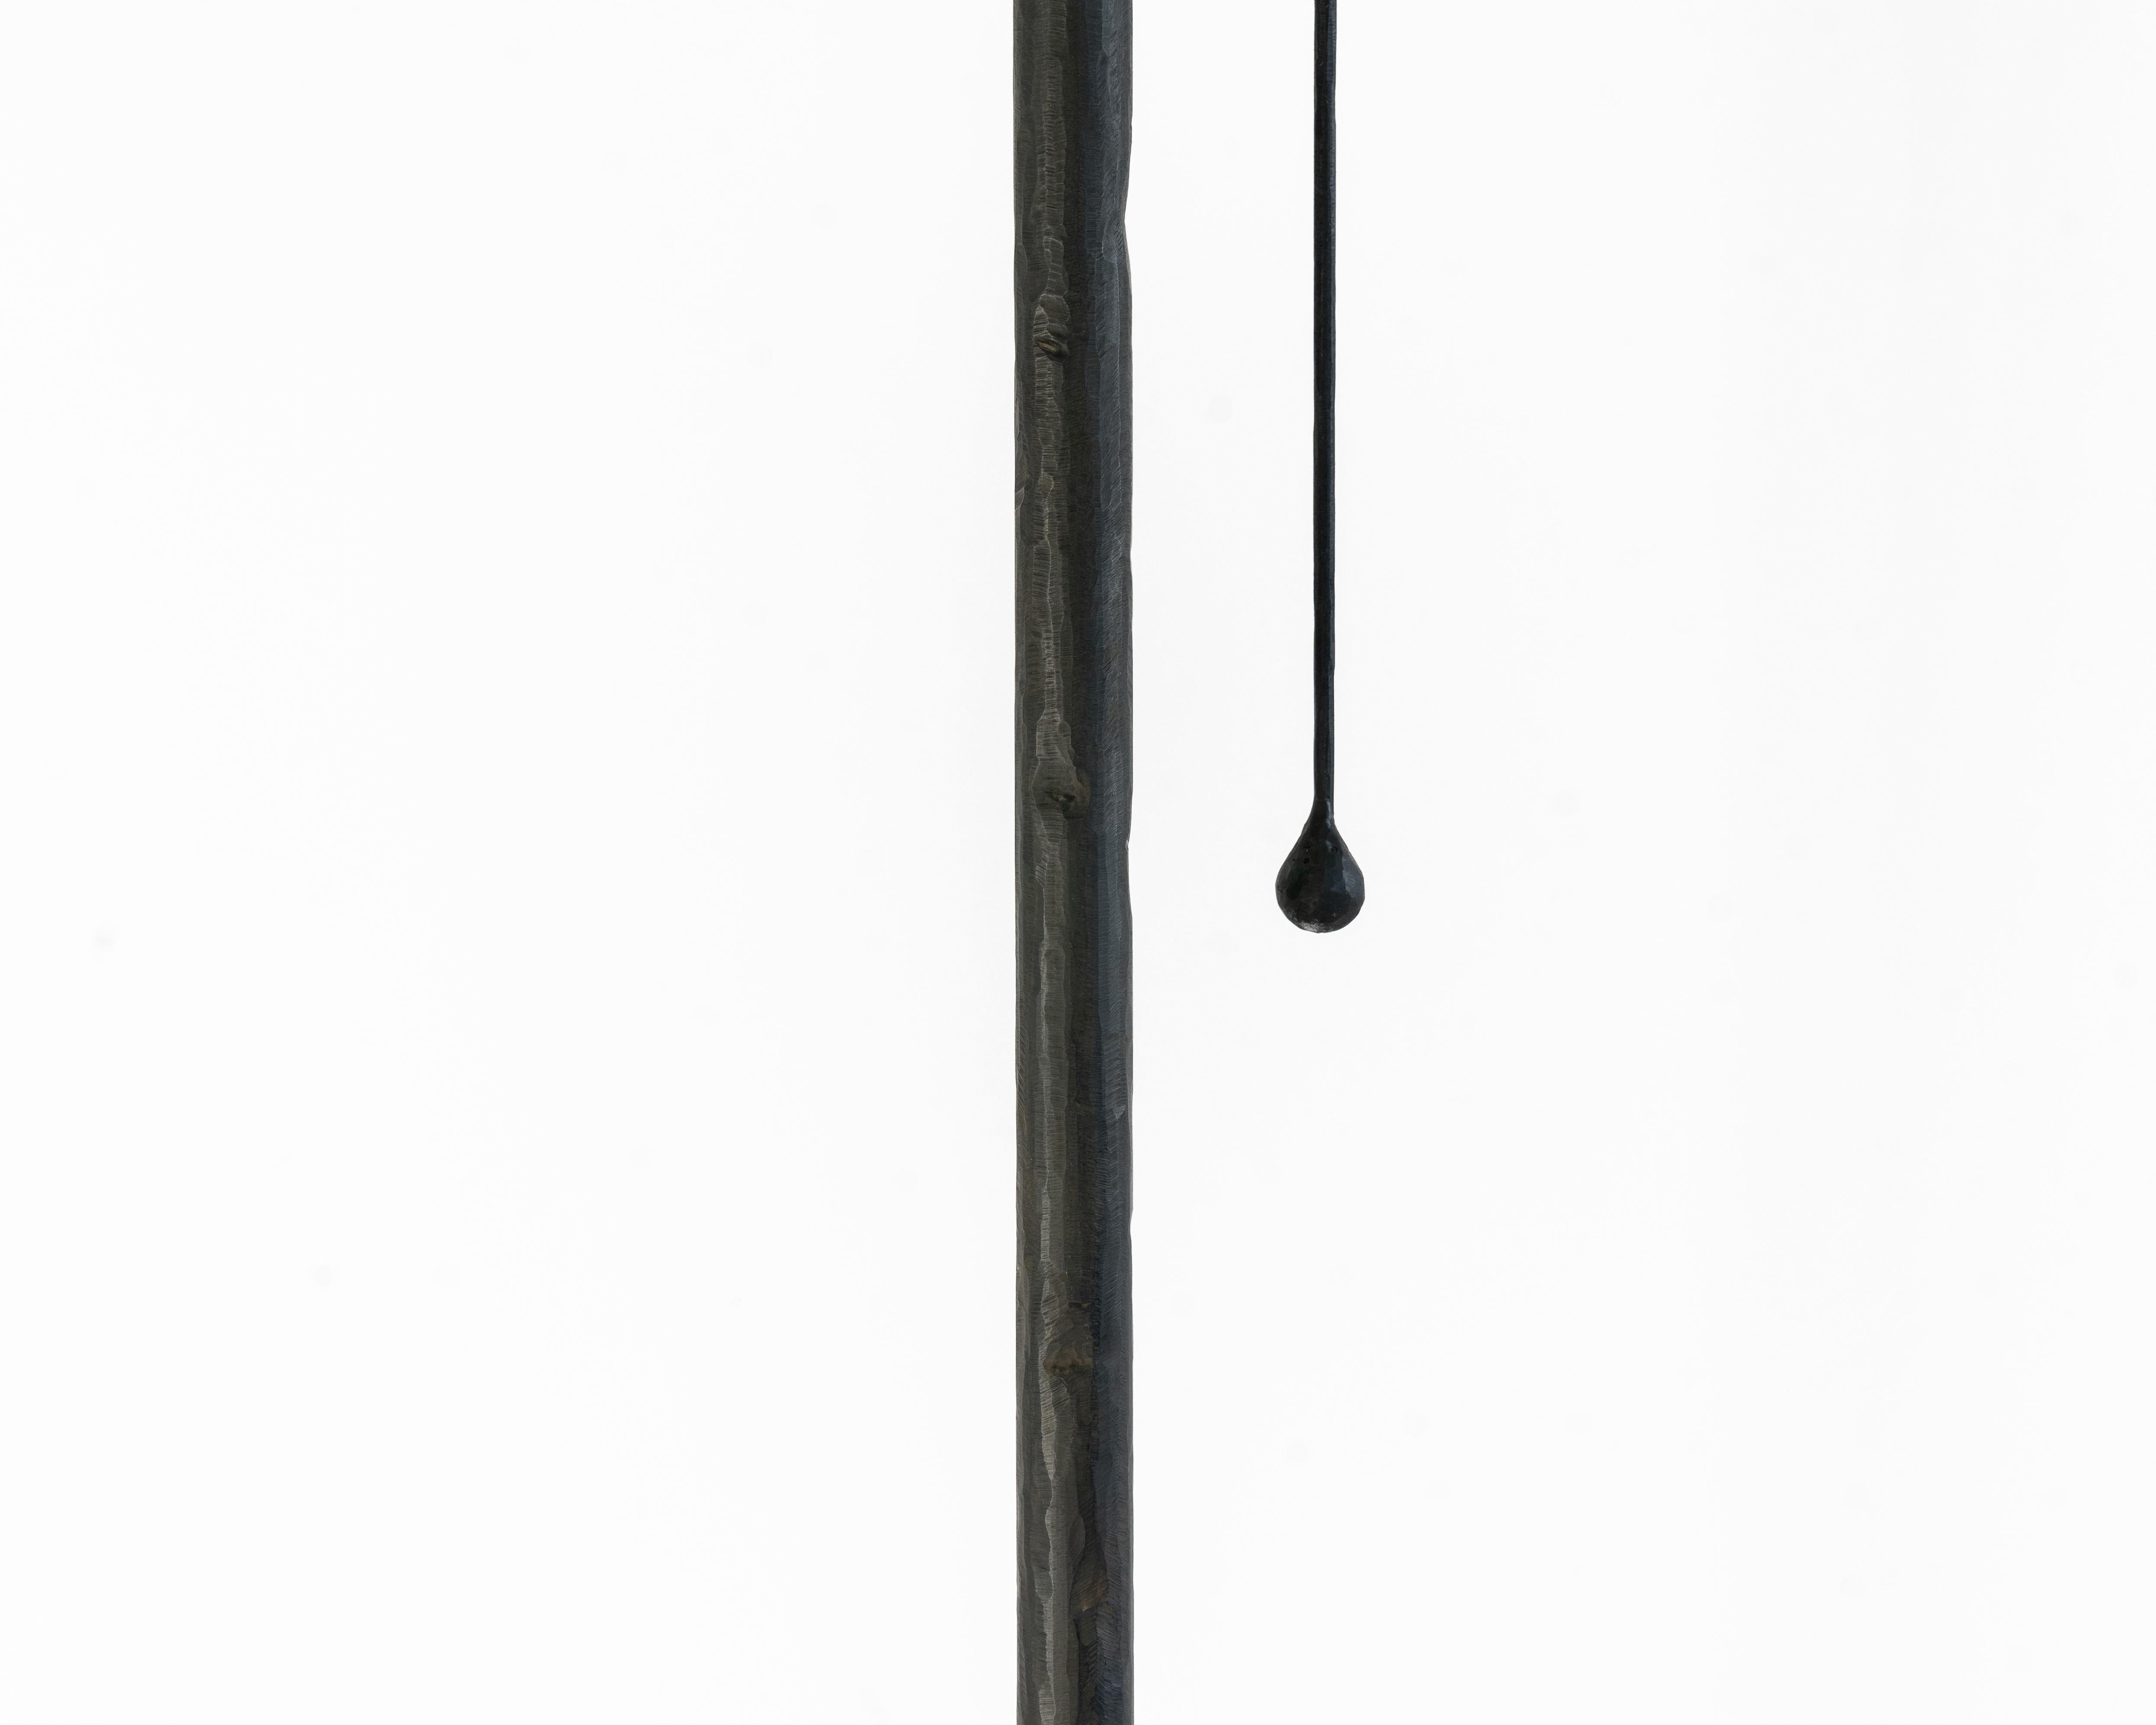 Floor Lamp Classic Contemporary Hand-sculpted Blackened Steel and Linen Shade In New Condition For Sale In Bronx, NY